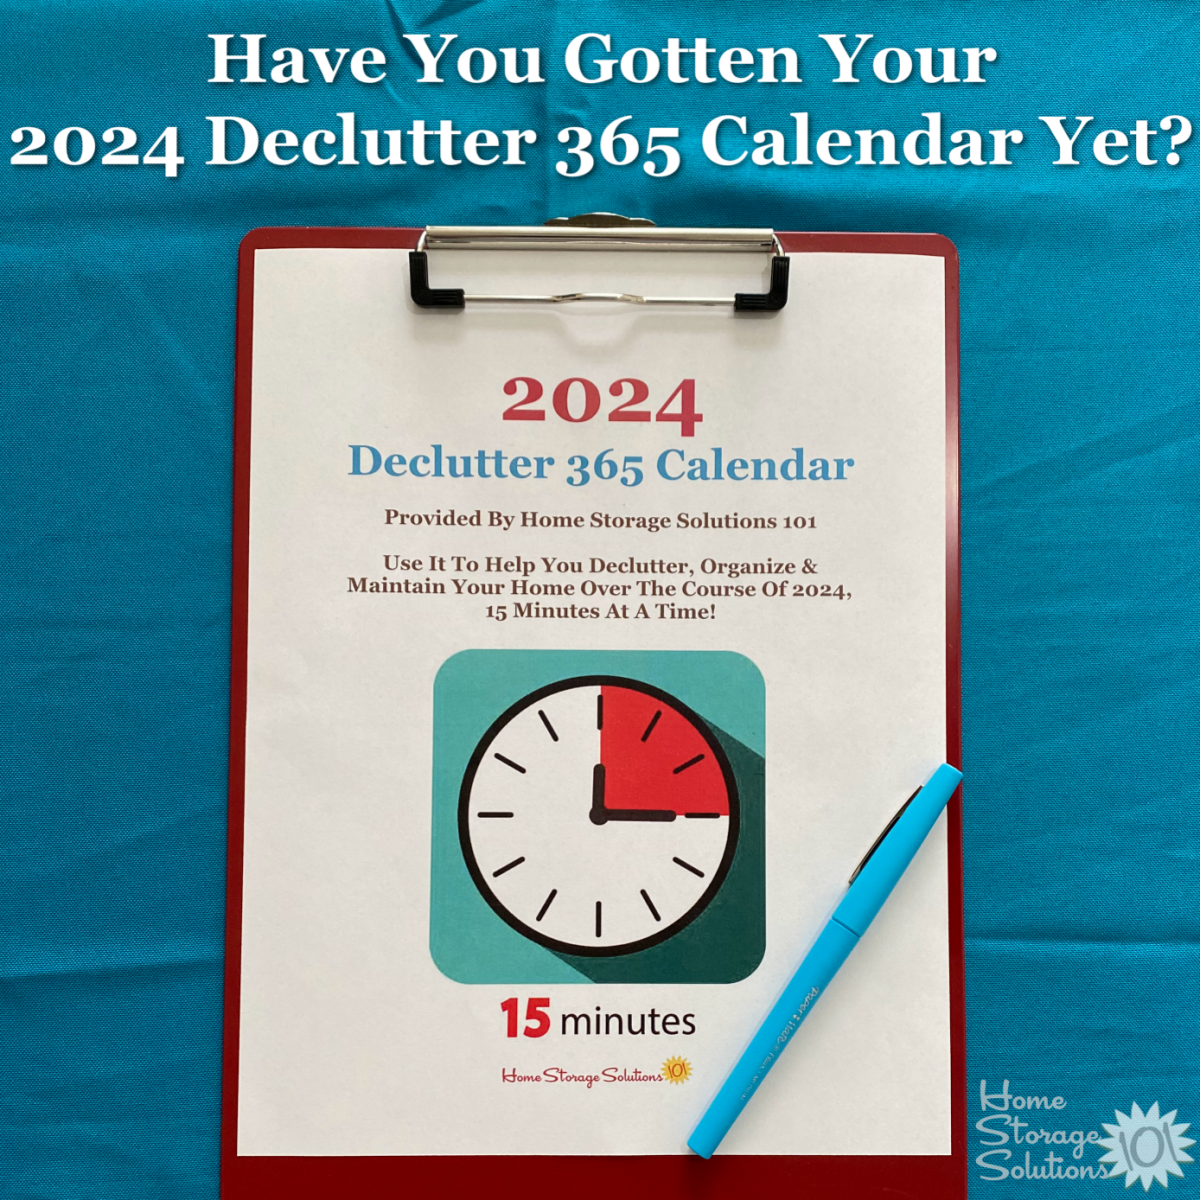 Get the full 2024 Declutter 365 calendar, a step by step plan to get your home decluttered without overwhelm {on Home Storage Solutions 101} #Declutter365 #DeclutteringHome #DeclutterTips